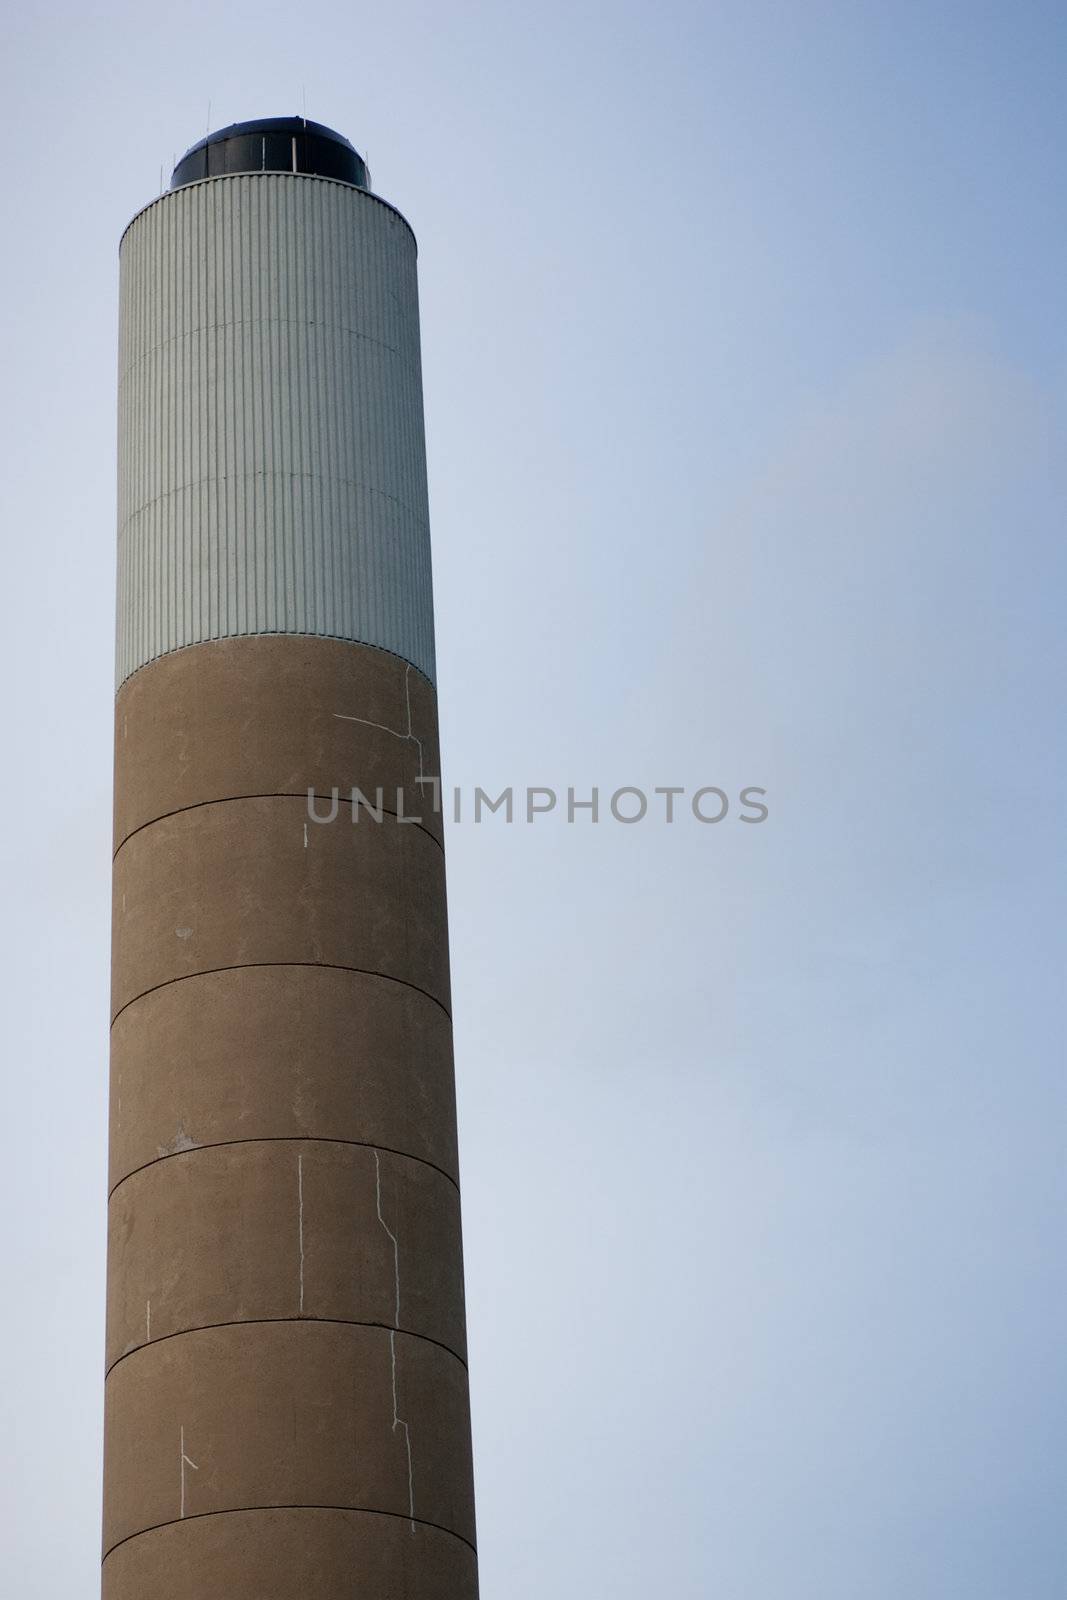 Top of a smoke stack by woodygraphs